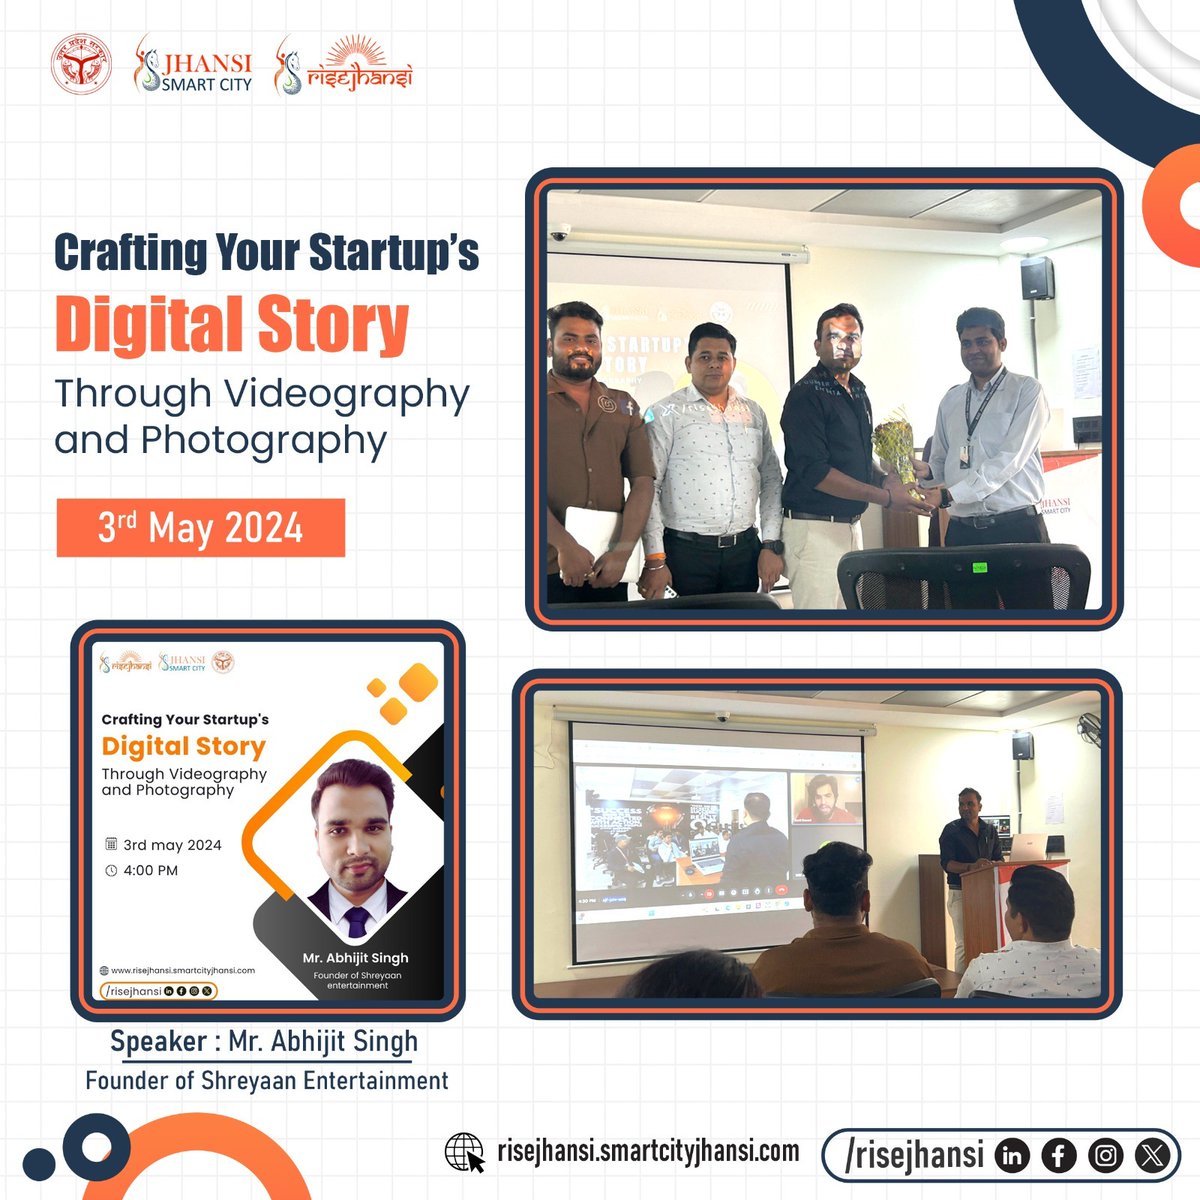 🚀✨ Recap: RISE Jhansi's event with Mr. Abhijit Singh, Founder of Shreyaan Entertainment, offered key insights on leveraging videography and photography to amplify startup narratives.
#RISEJhansi #StartupSuccess #jhansi #Incubationmasters #IM #Jhansismartcity #VisualStorytelling